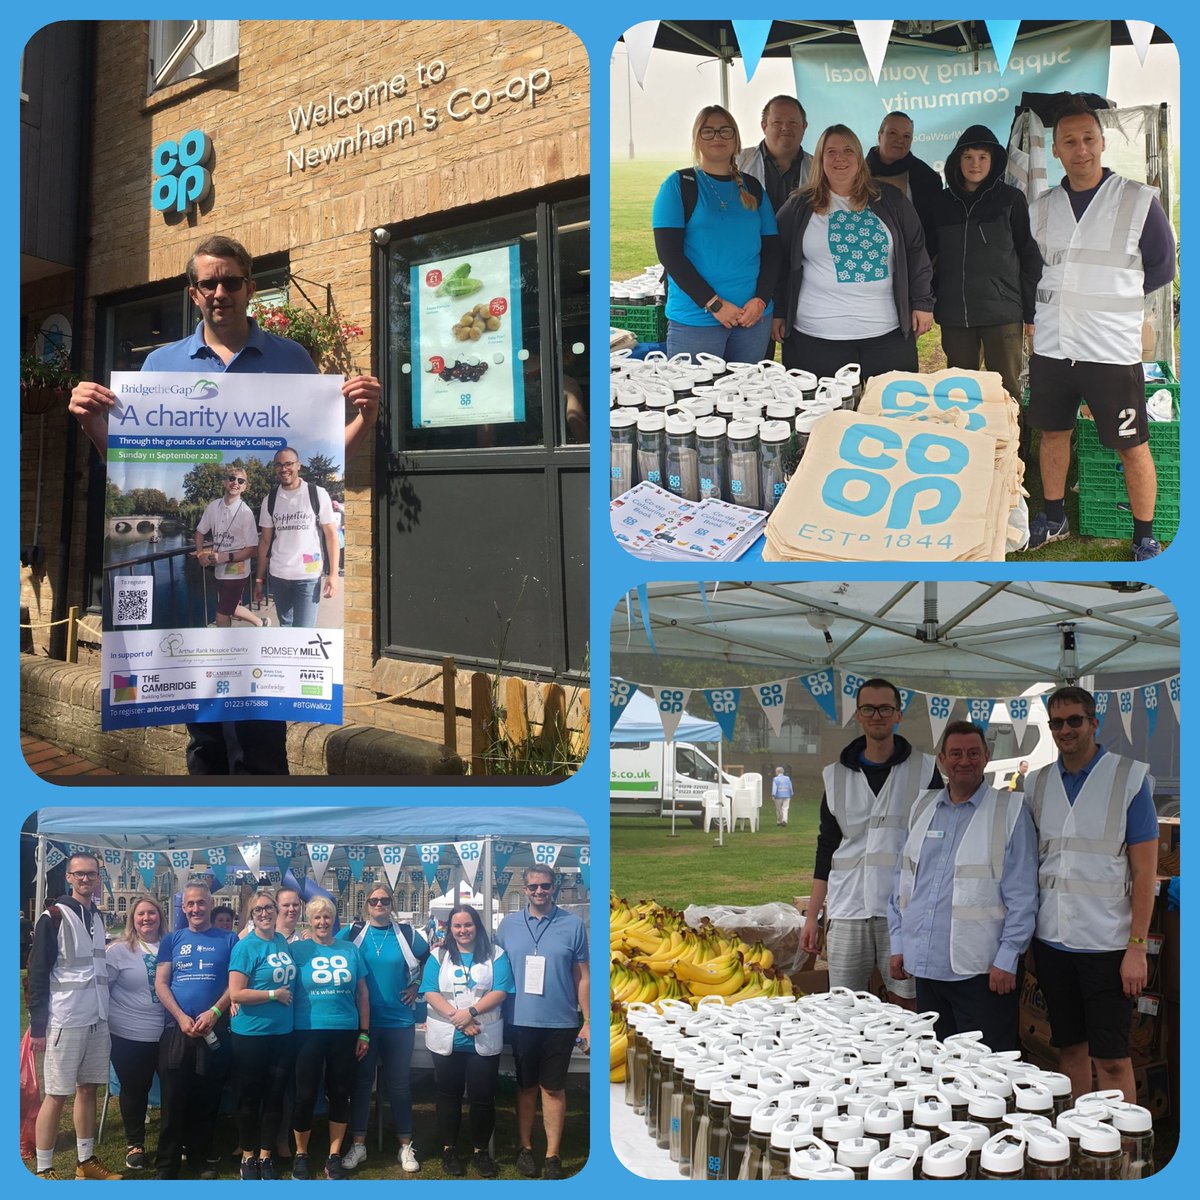 Thankyou to @eggleton_simon for supporting 2 amazing local causes and organising our Cambridge @coopuk support for #Bridgethegap on sunday. Organising everything from fruit, bottles, bags, gazebos, volunteers and even a Lorry! @PeterBatt3 @lucyhilucy @steveall1 @RuthCrane_MPC